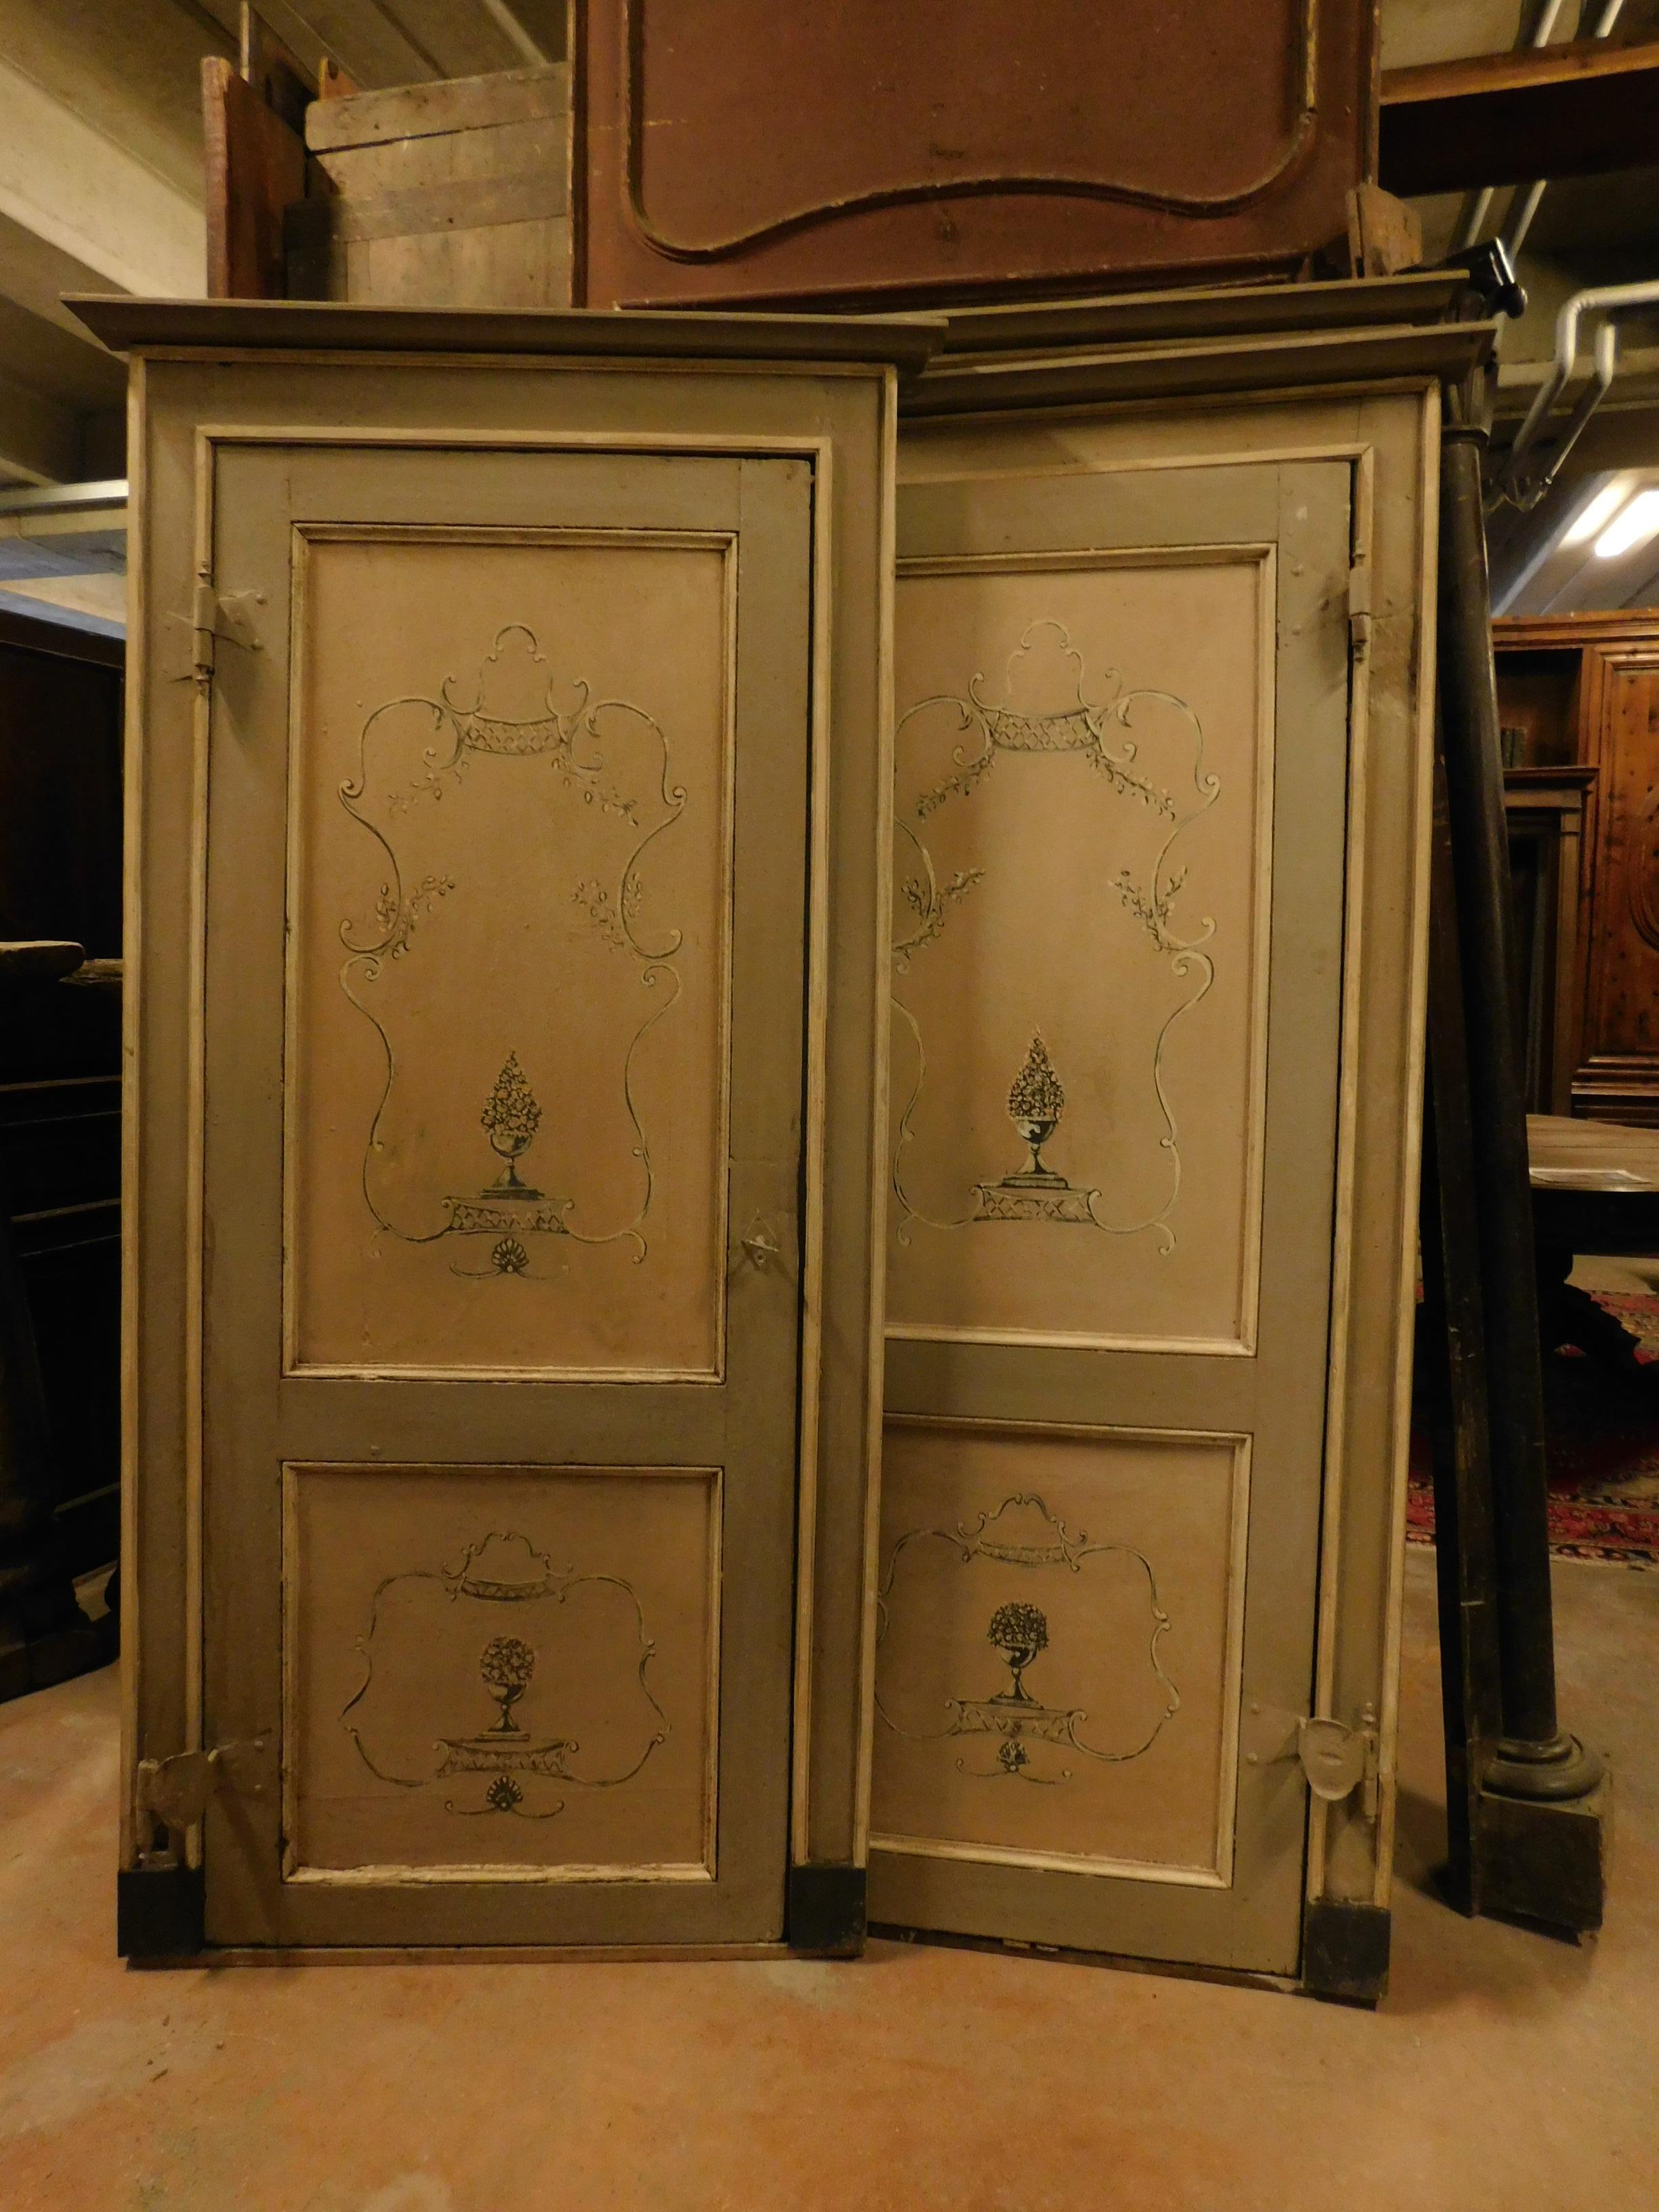 Series of 4 identical antique doors, lacquered and hand-painted in the 18th century by an Italian artist, gray beige and brown colors, very elegant and well finished, with a 